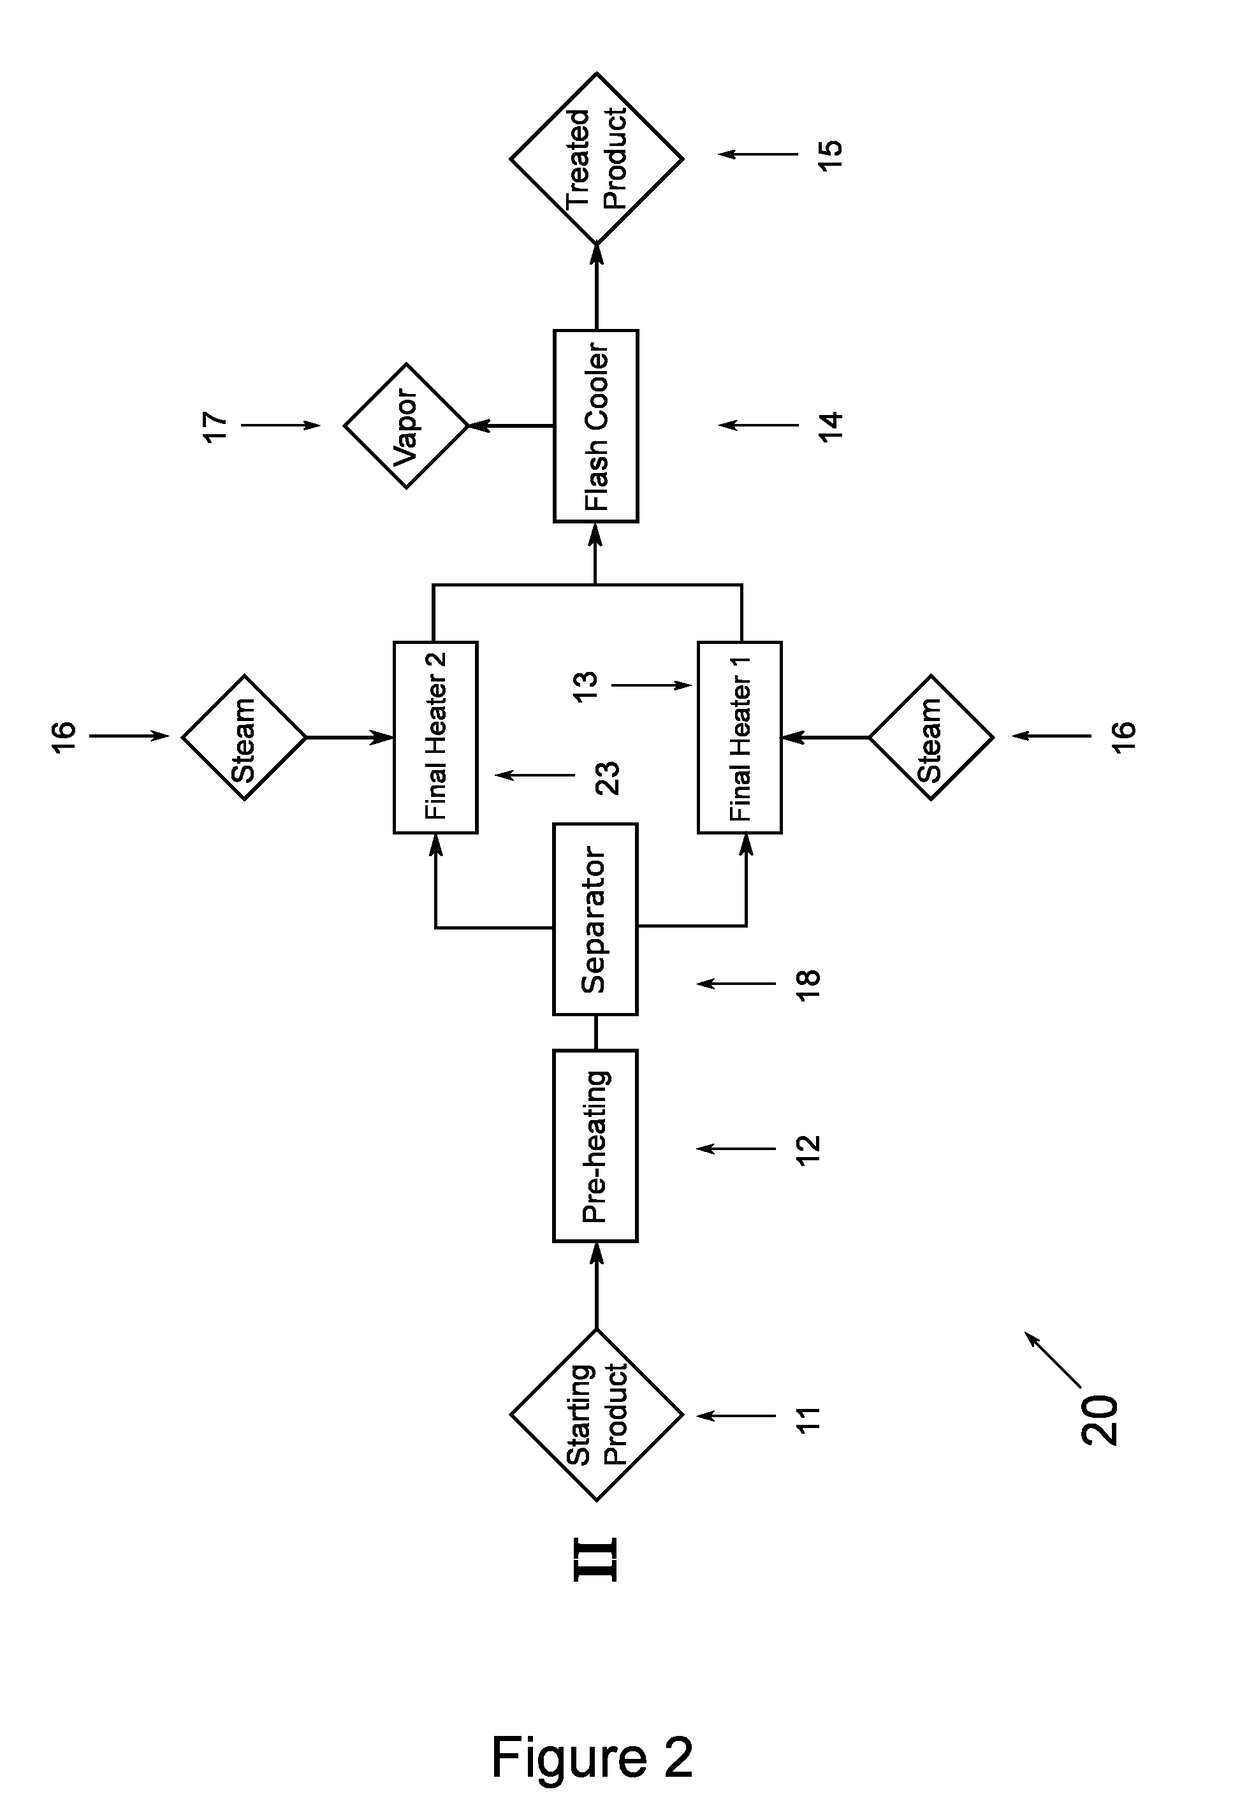 Method of cleaning a high temperature food processing line in place and food sterilization line